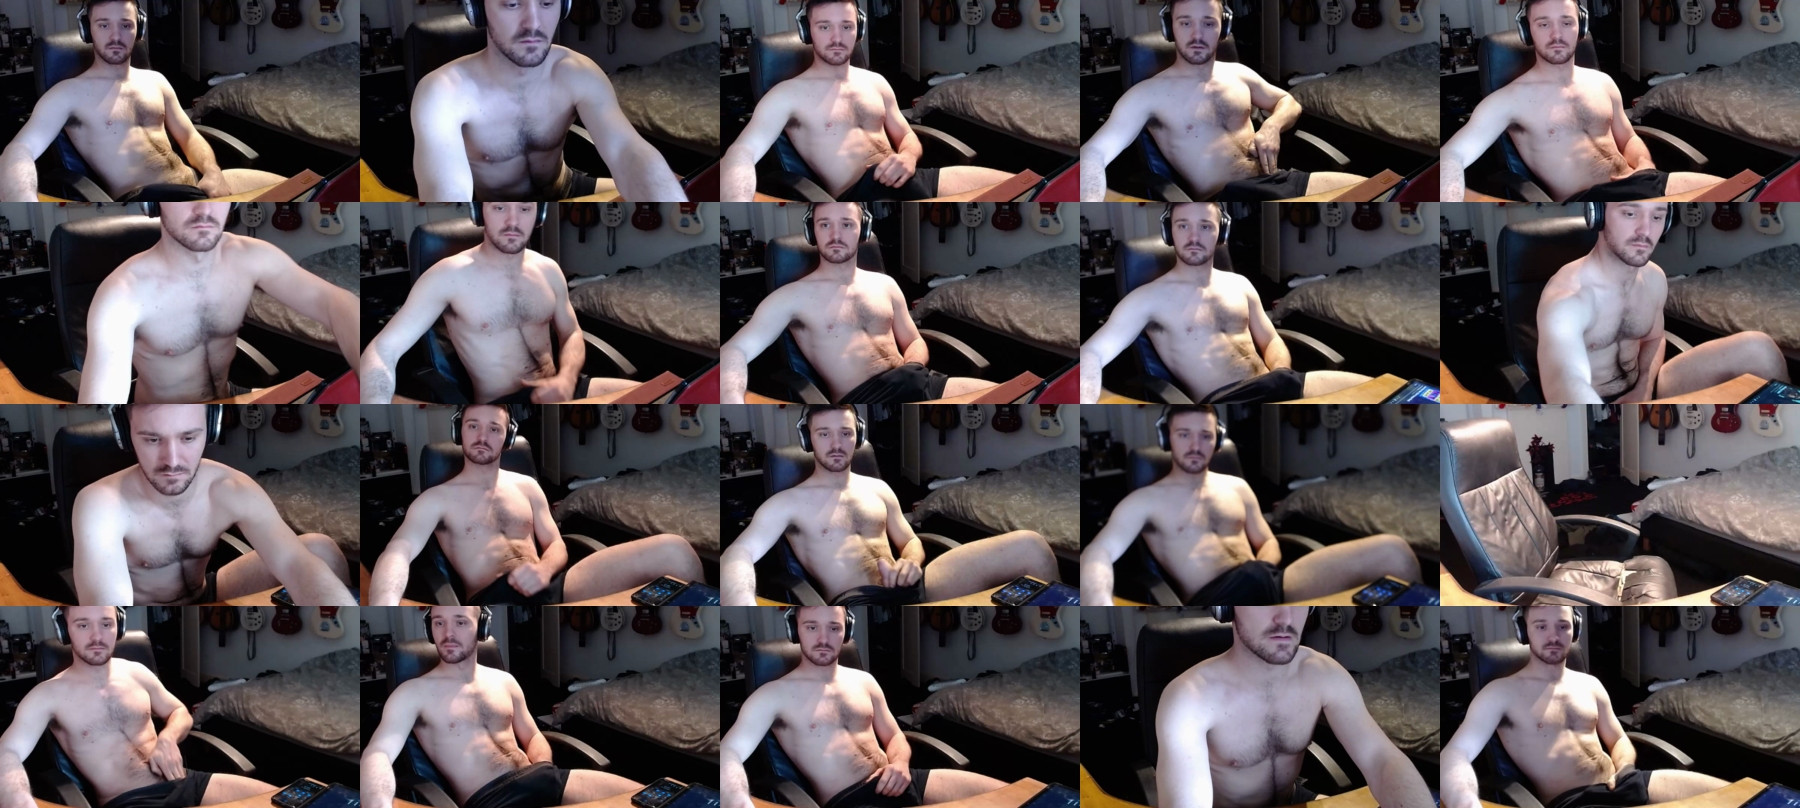 Rugbyboy94  26-03-2021 Male Topless